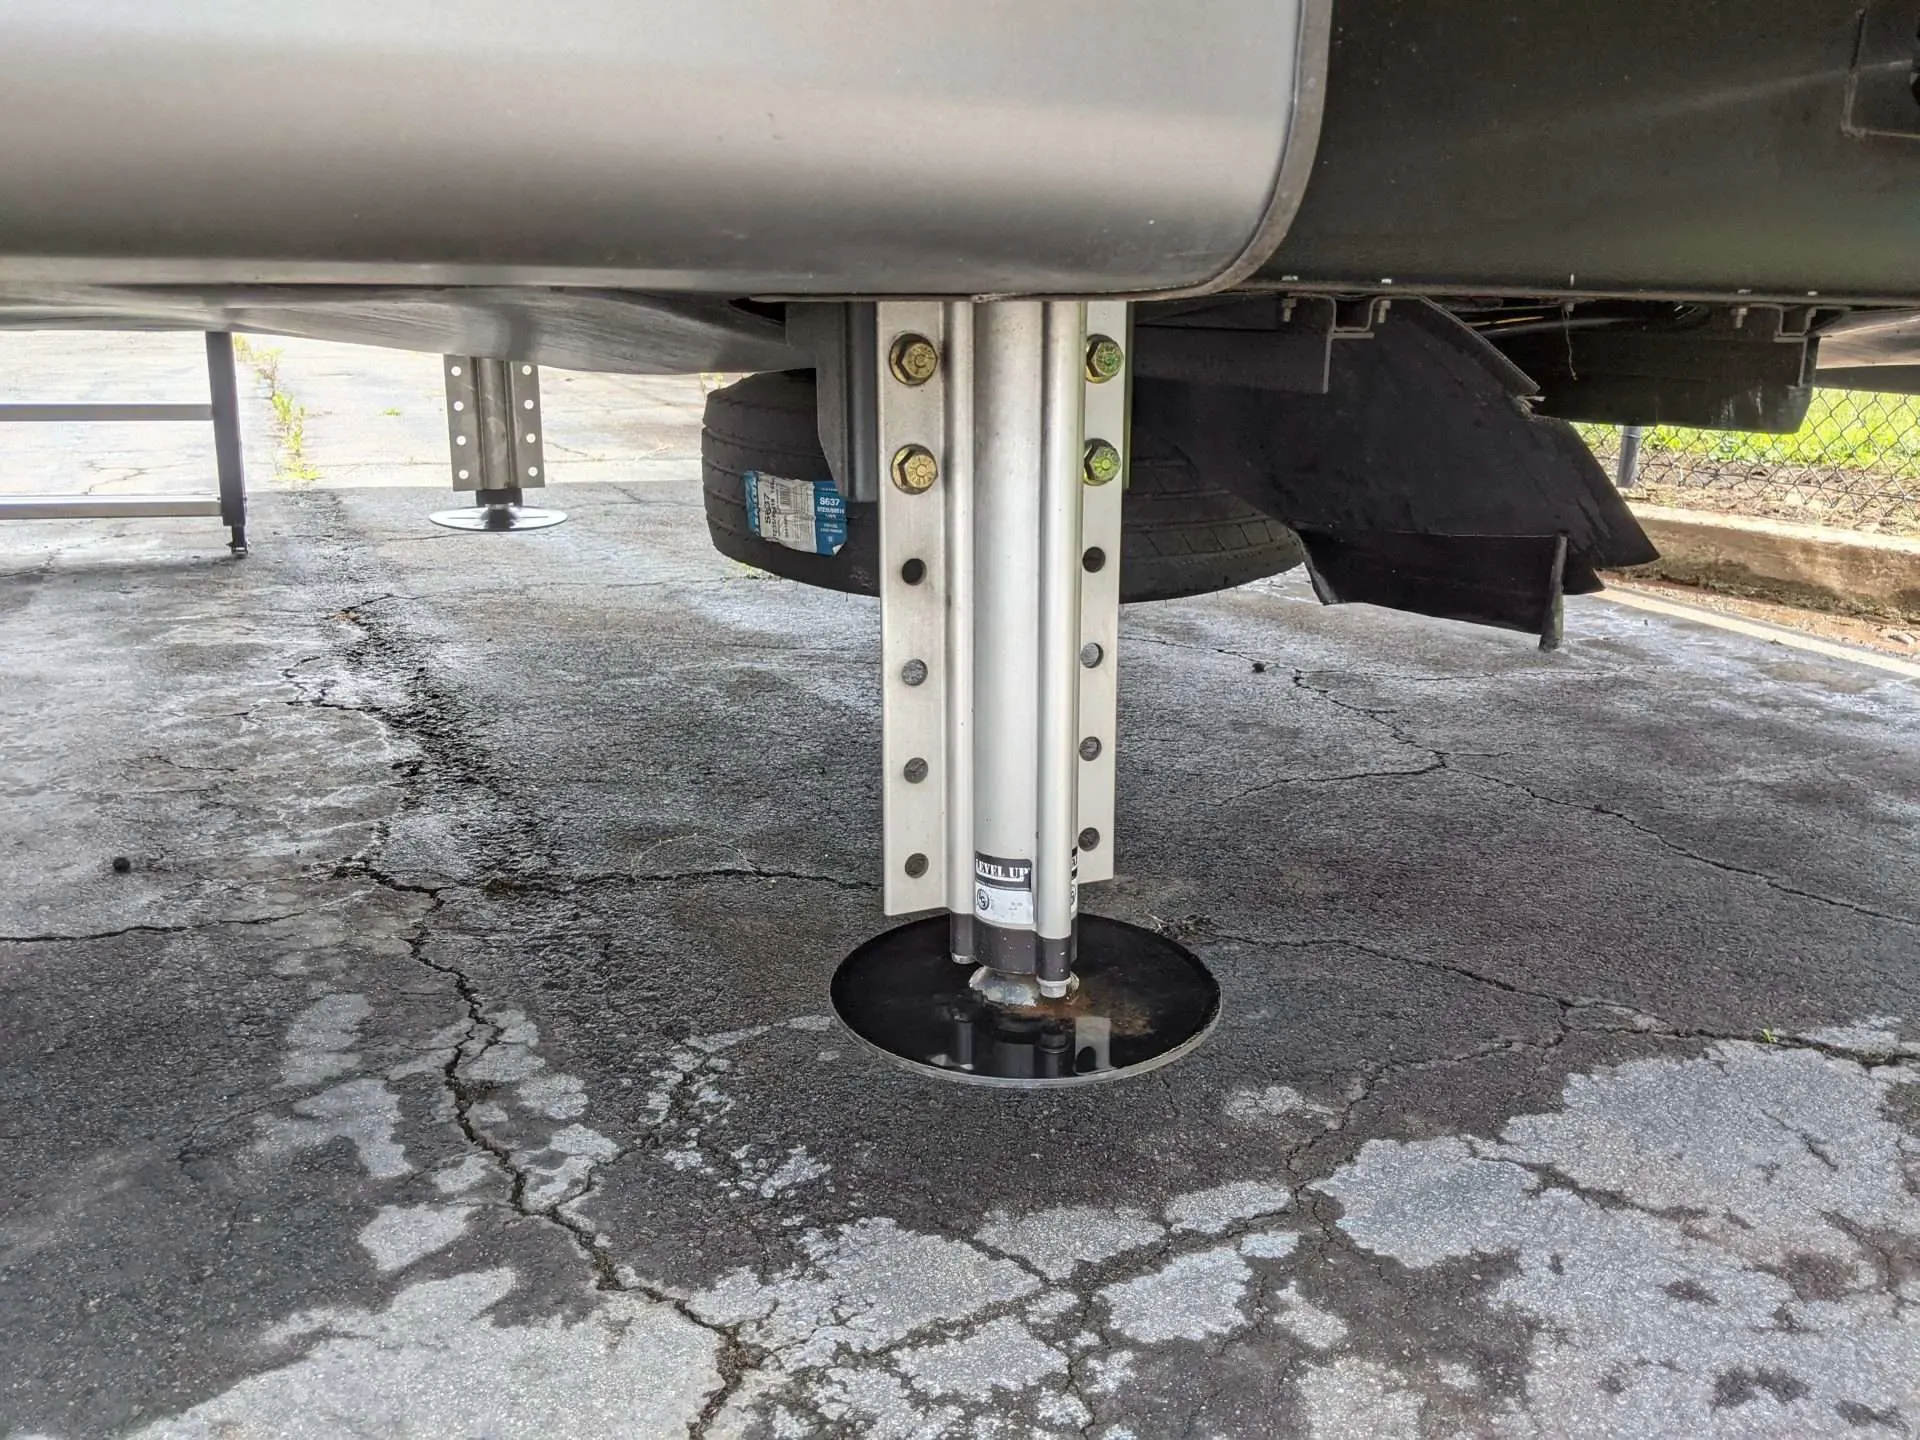 Underneath RV where an RV leveler in place.